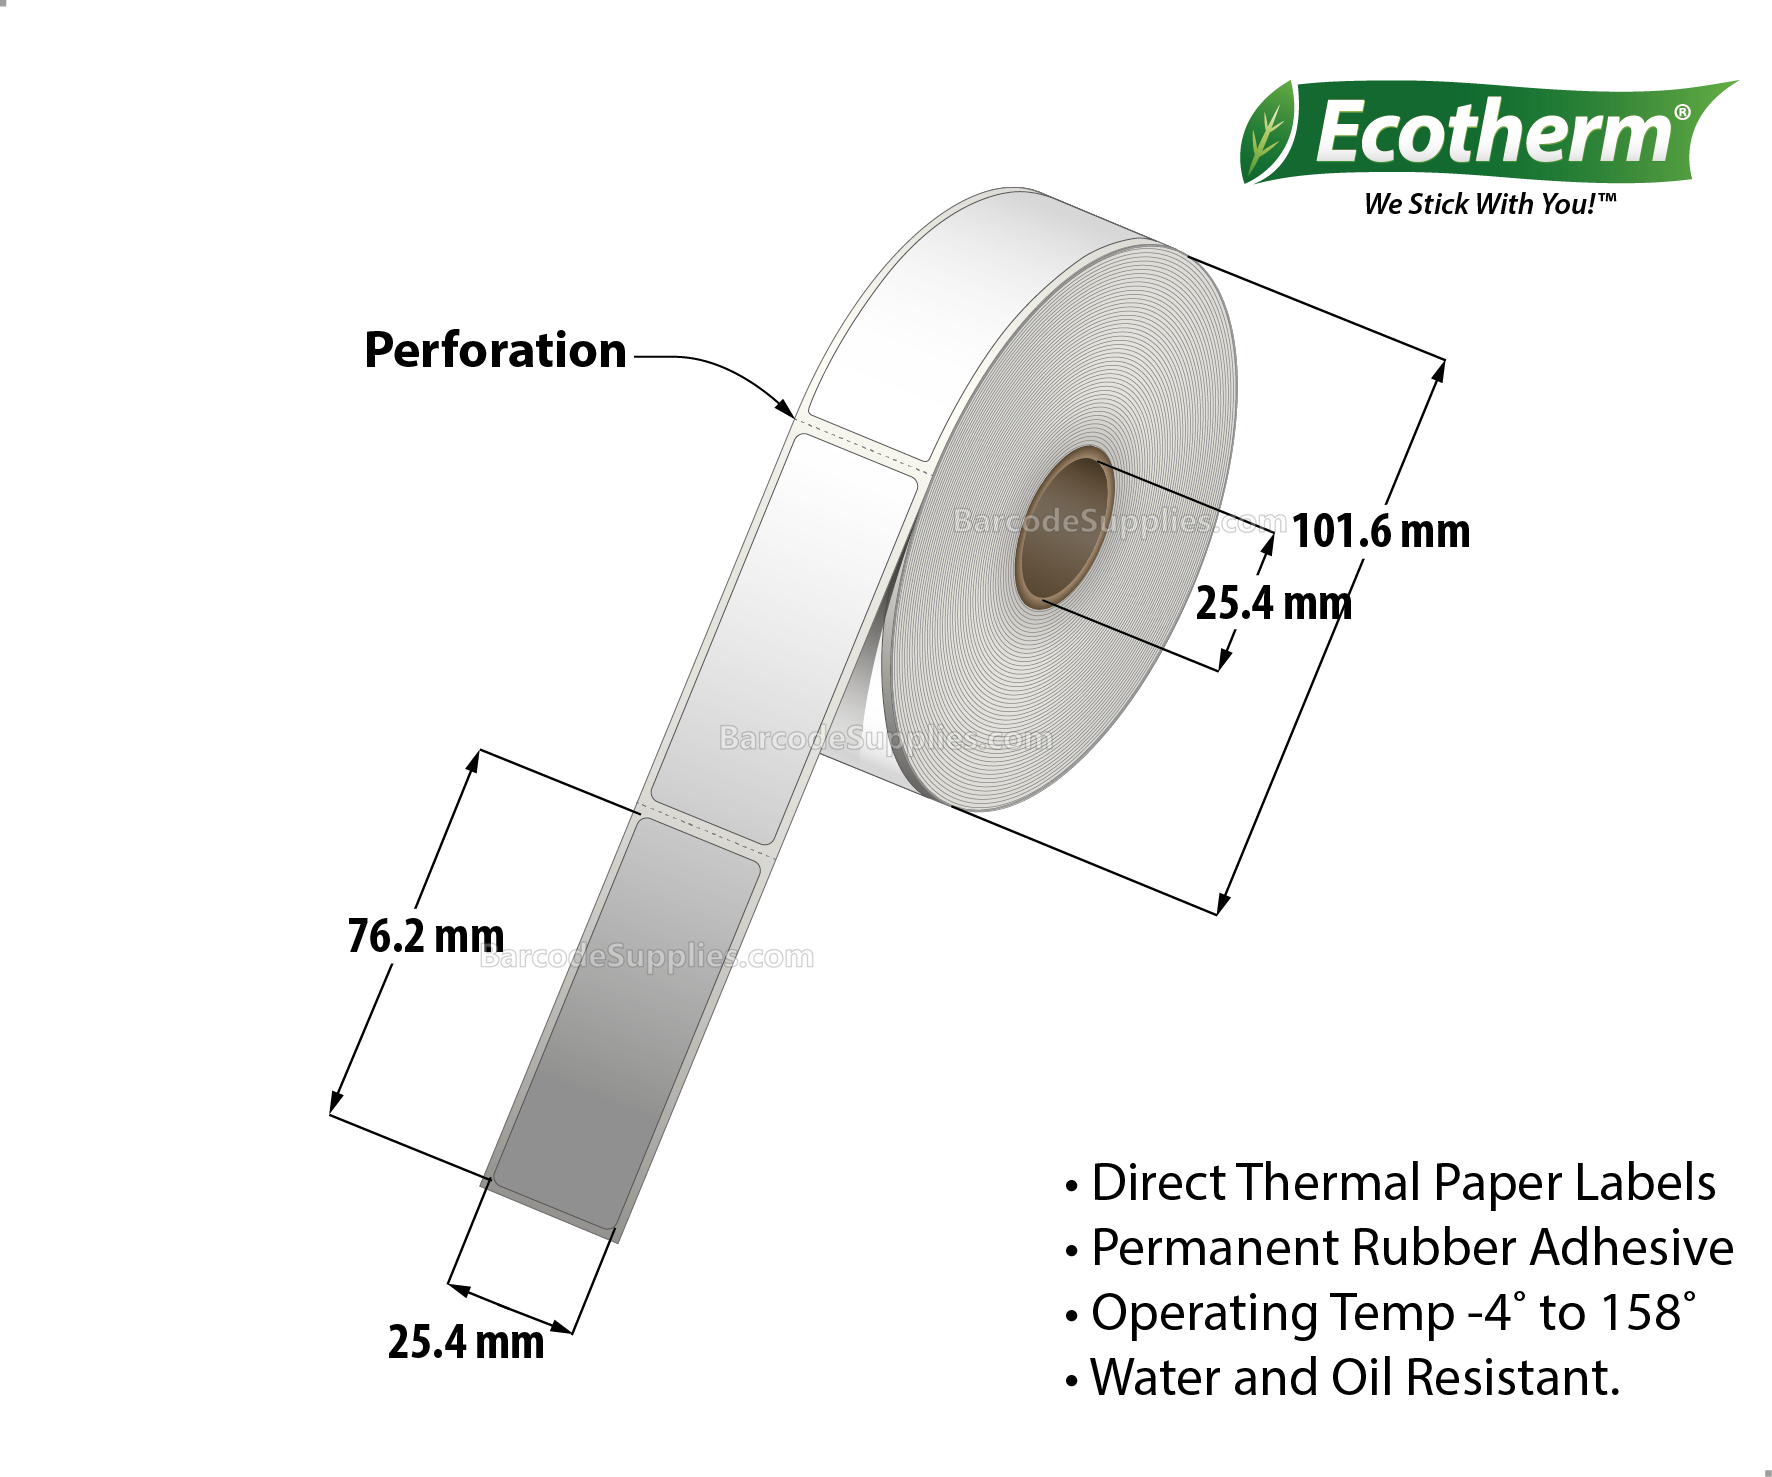 1 x 3 Direct Thermal White Labels With Rubber Adhesive - Perforated - 680 Labels Per Roll - Carton Of 4 Rolls - 2720 Labels Total - MPN: ECOTHERM14130-4